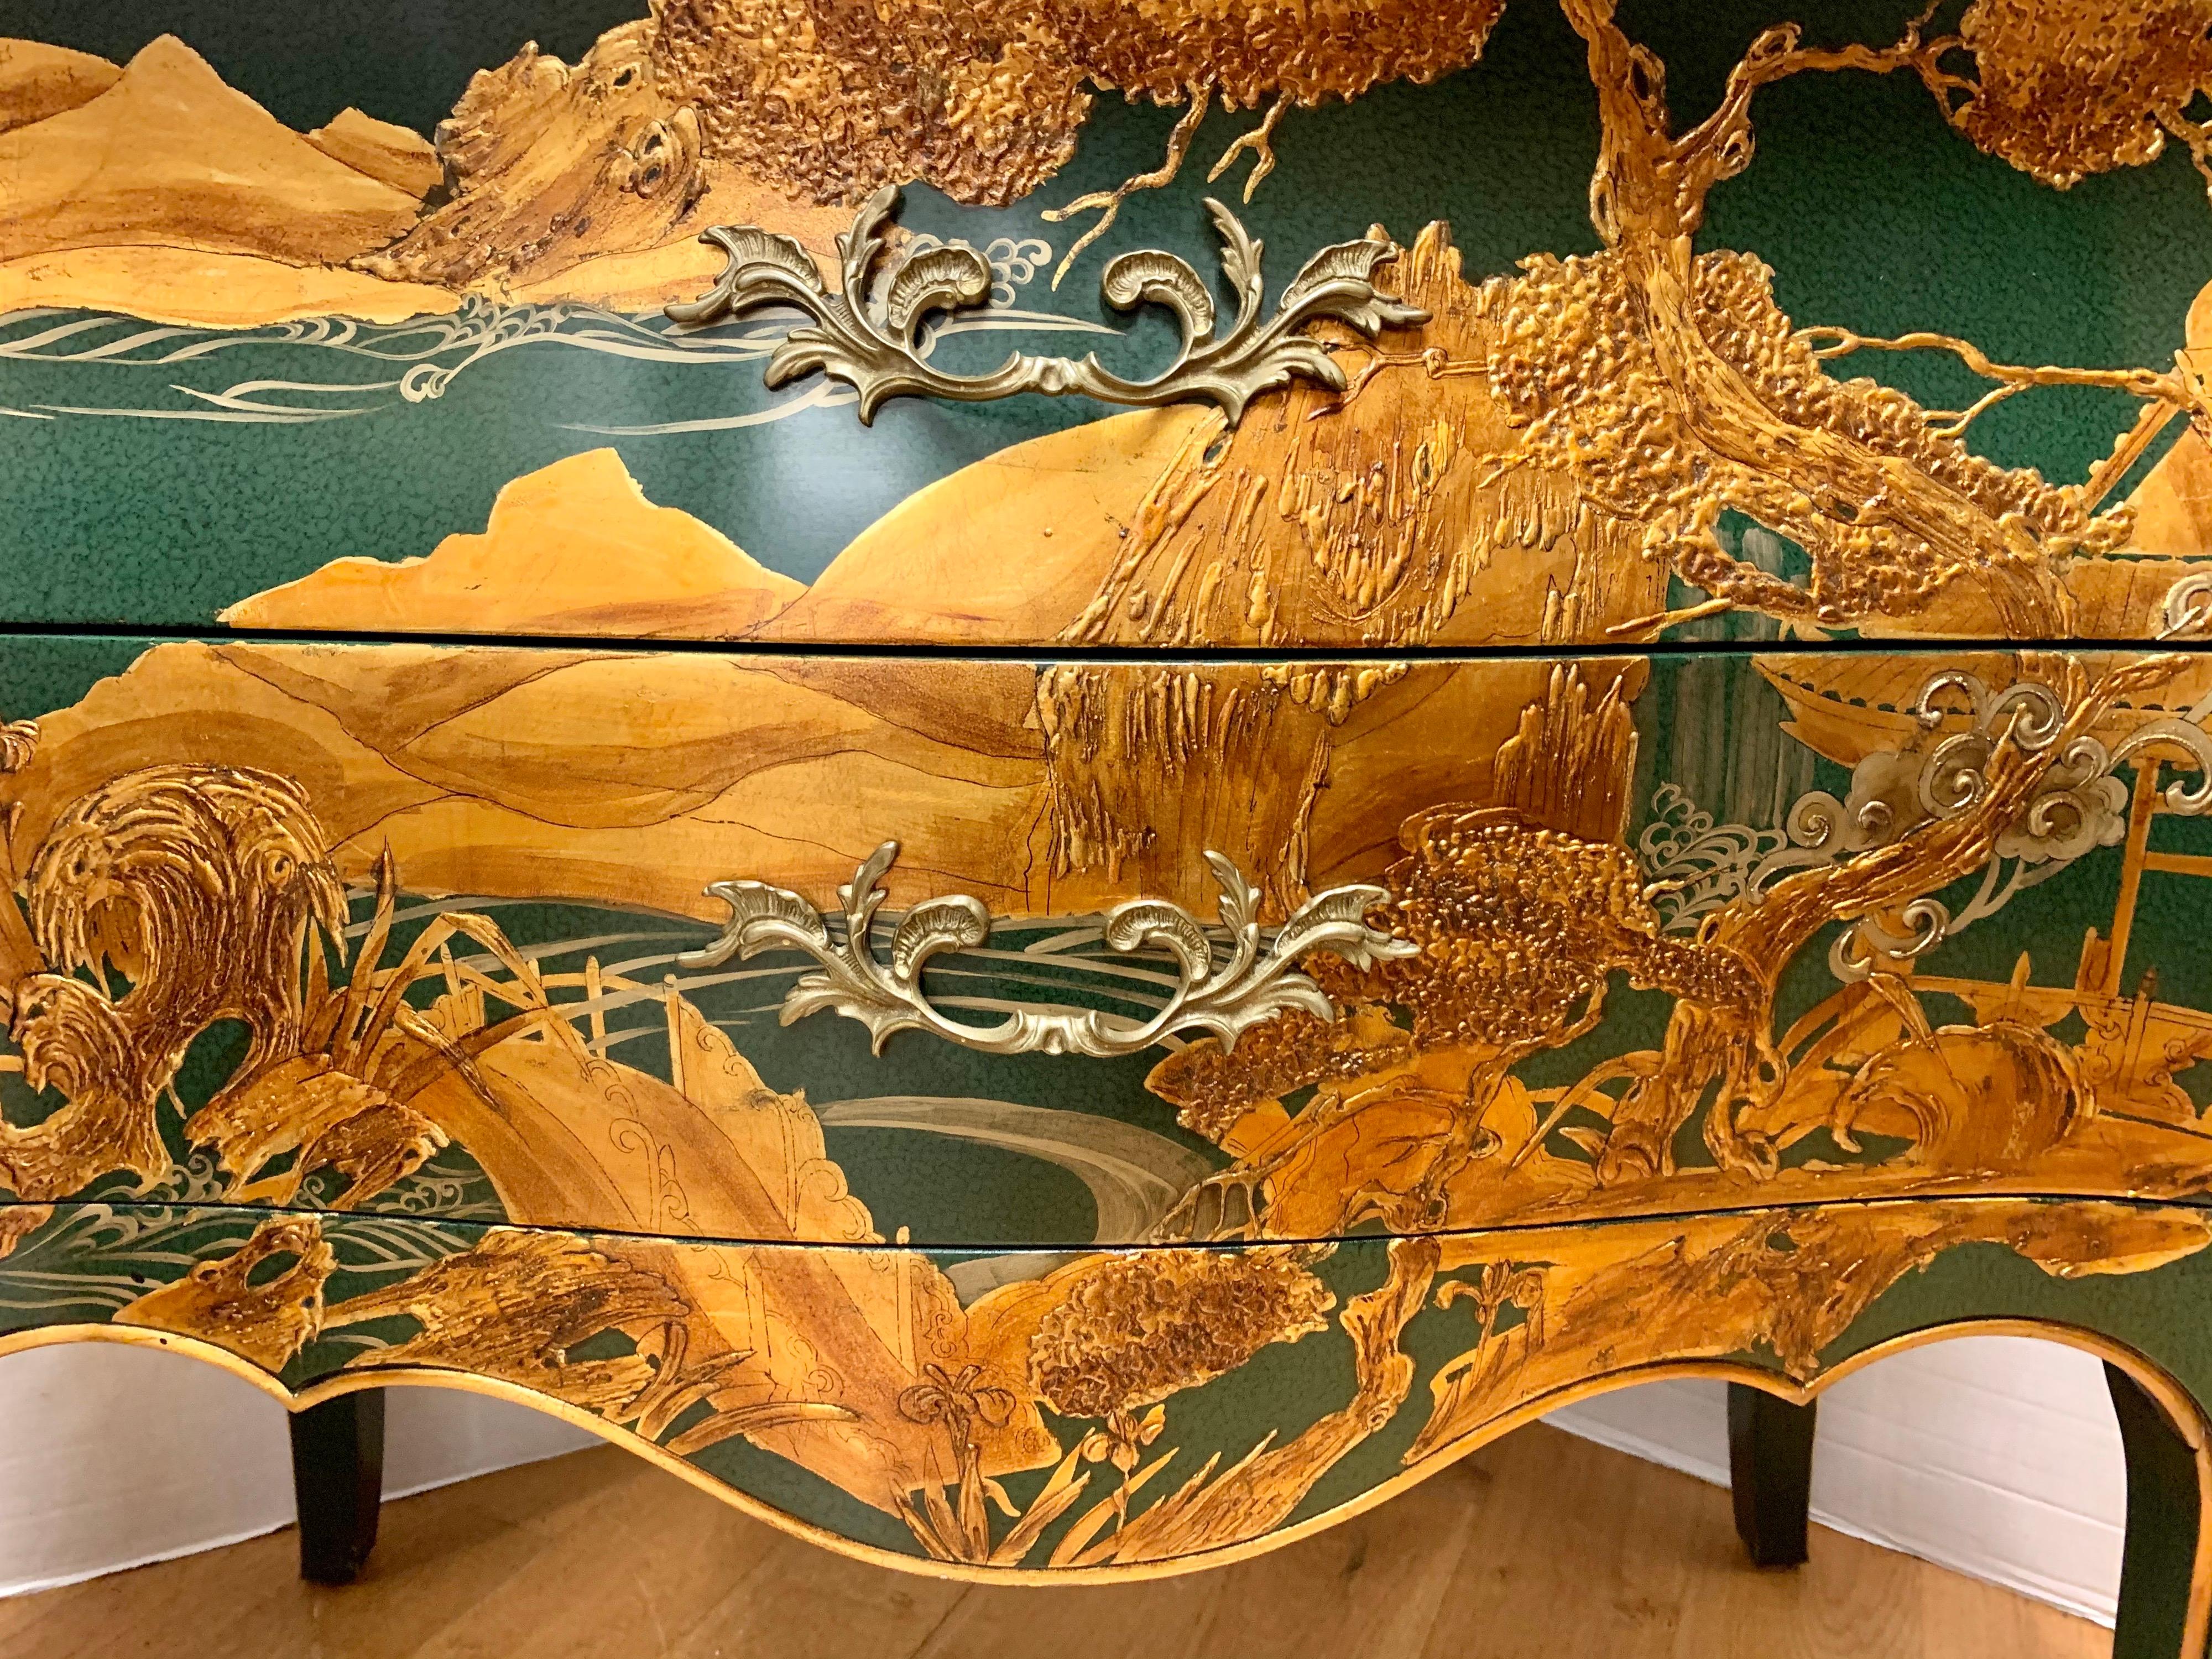 Stunning beautifully crafted chinoiserie two-drawer commode bombay chest by high-end maker John Widdicomb. Green lacquer finish with gold handpainted raised gilt decoration depicting a landscape of mountains and trees. With cast brass pulls and